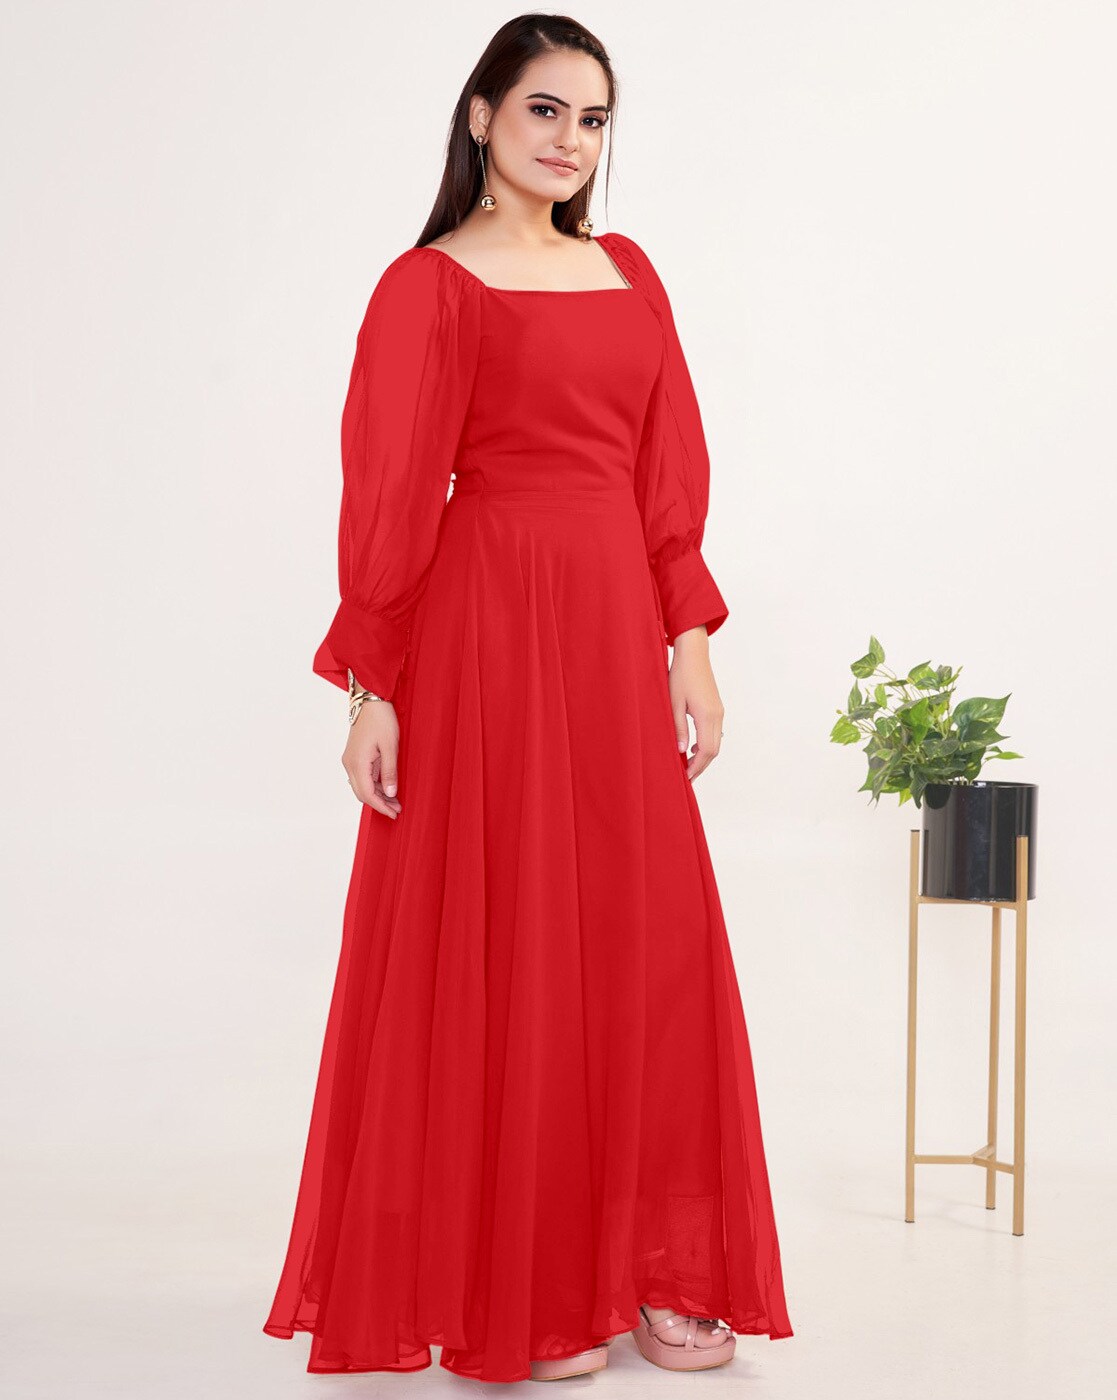 Red Lace Muslim Wedding Dress With Pearls And Long Sleeves Sparkling Dubai  Red Bridal Gown Pricess Vestido De Novia 2023 From Donnaweddingdress26,  $151.82 | DHgate.Com